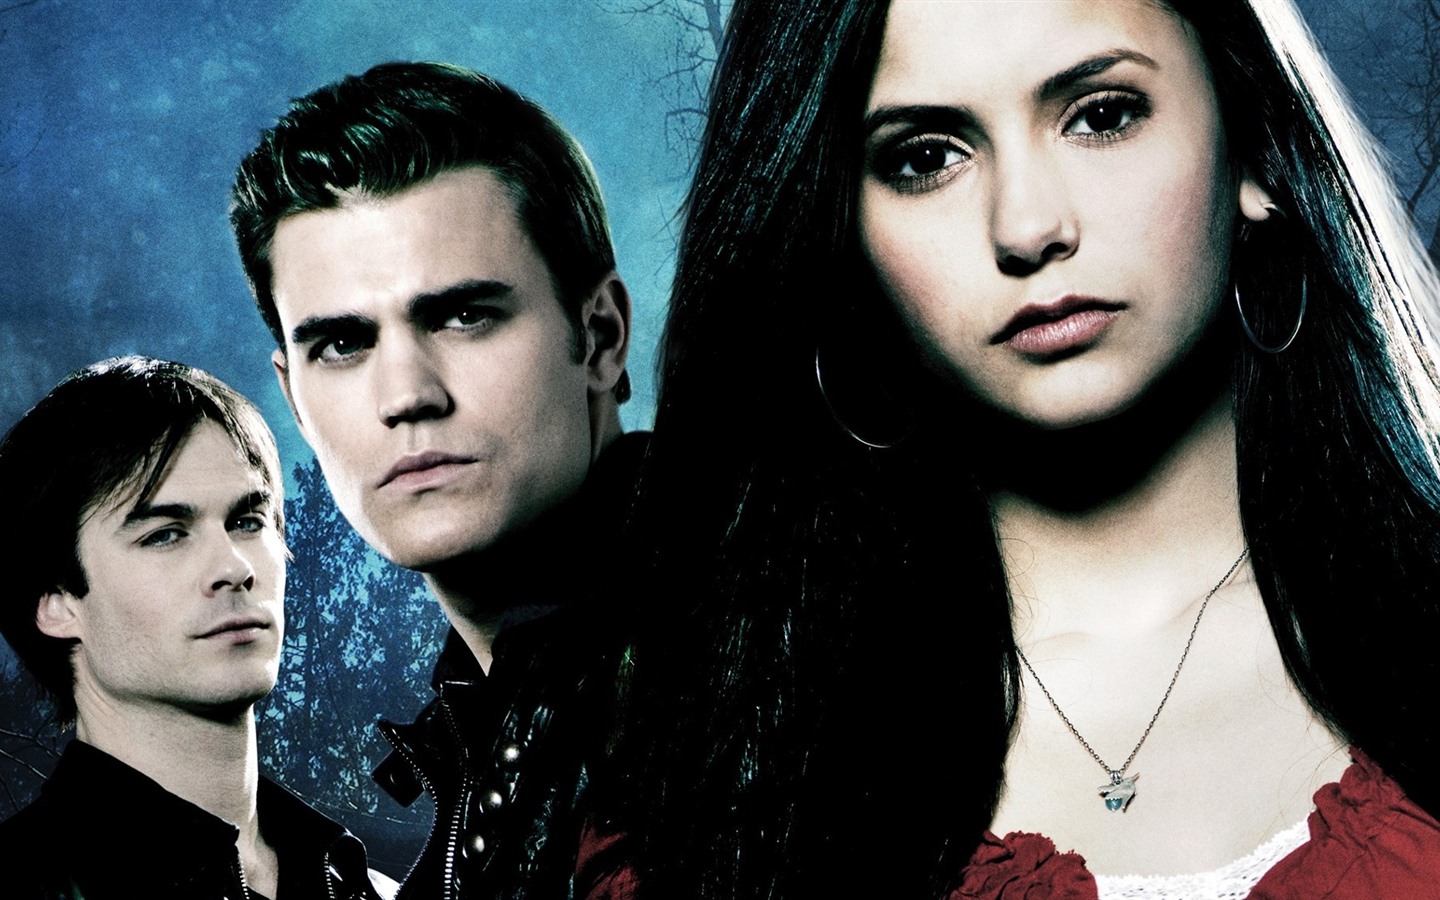 The Vampire Diaries HD Wallpapers #7 - 1440x900